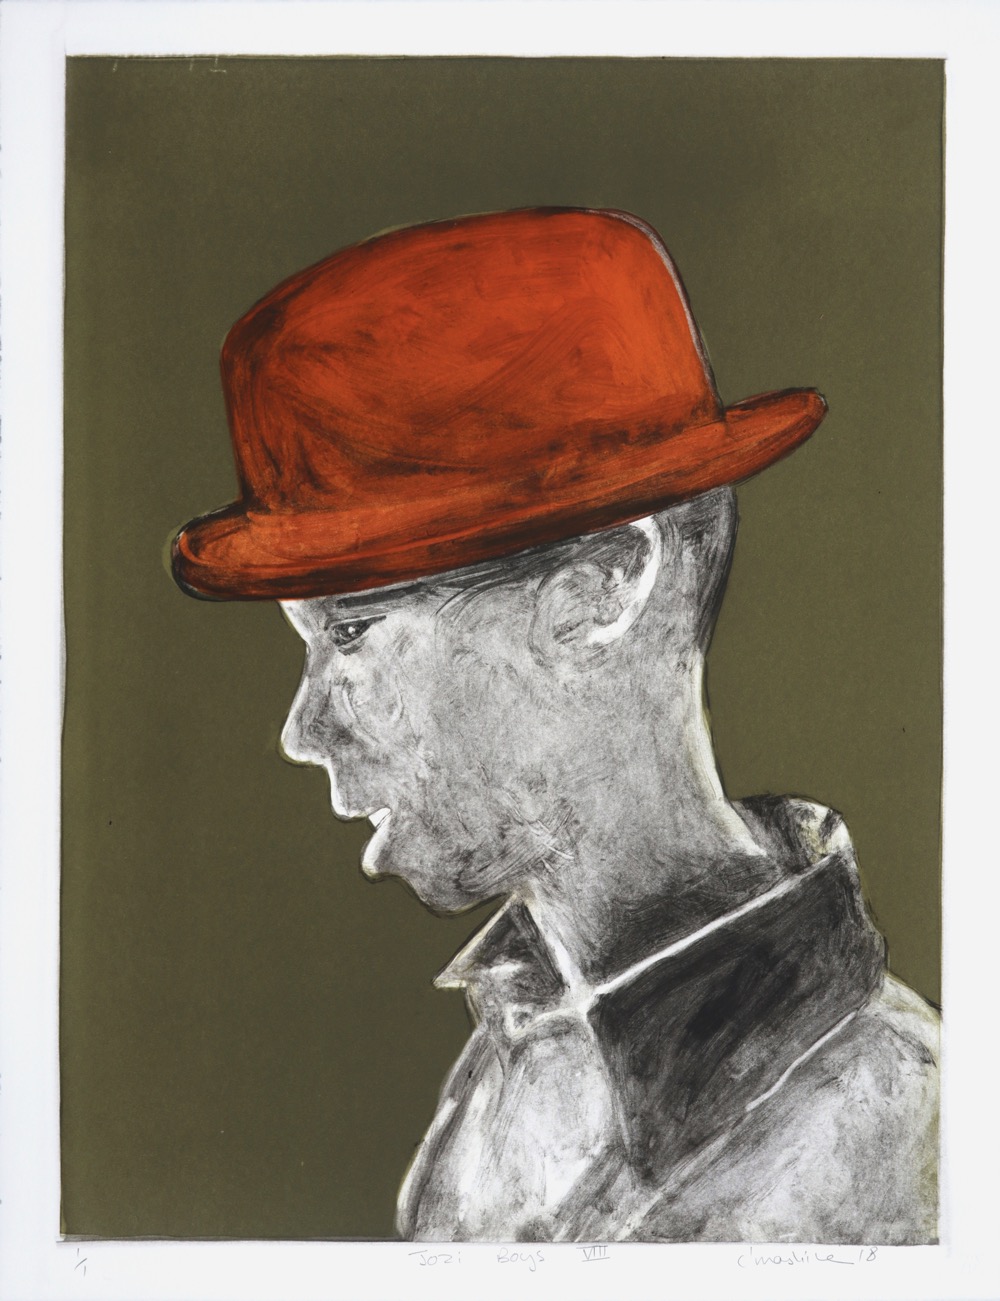 Profile of a young man in a trilby hat wearing a collared shirt.